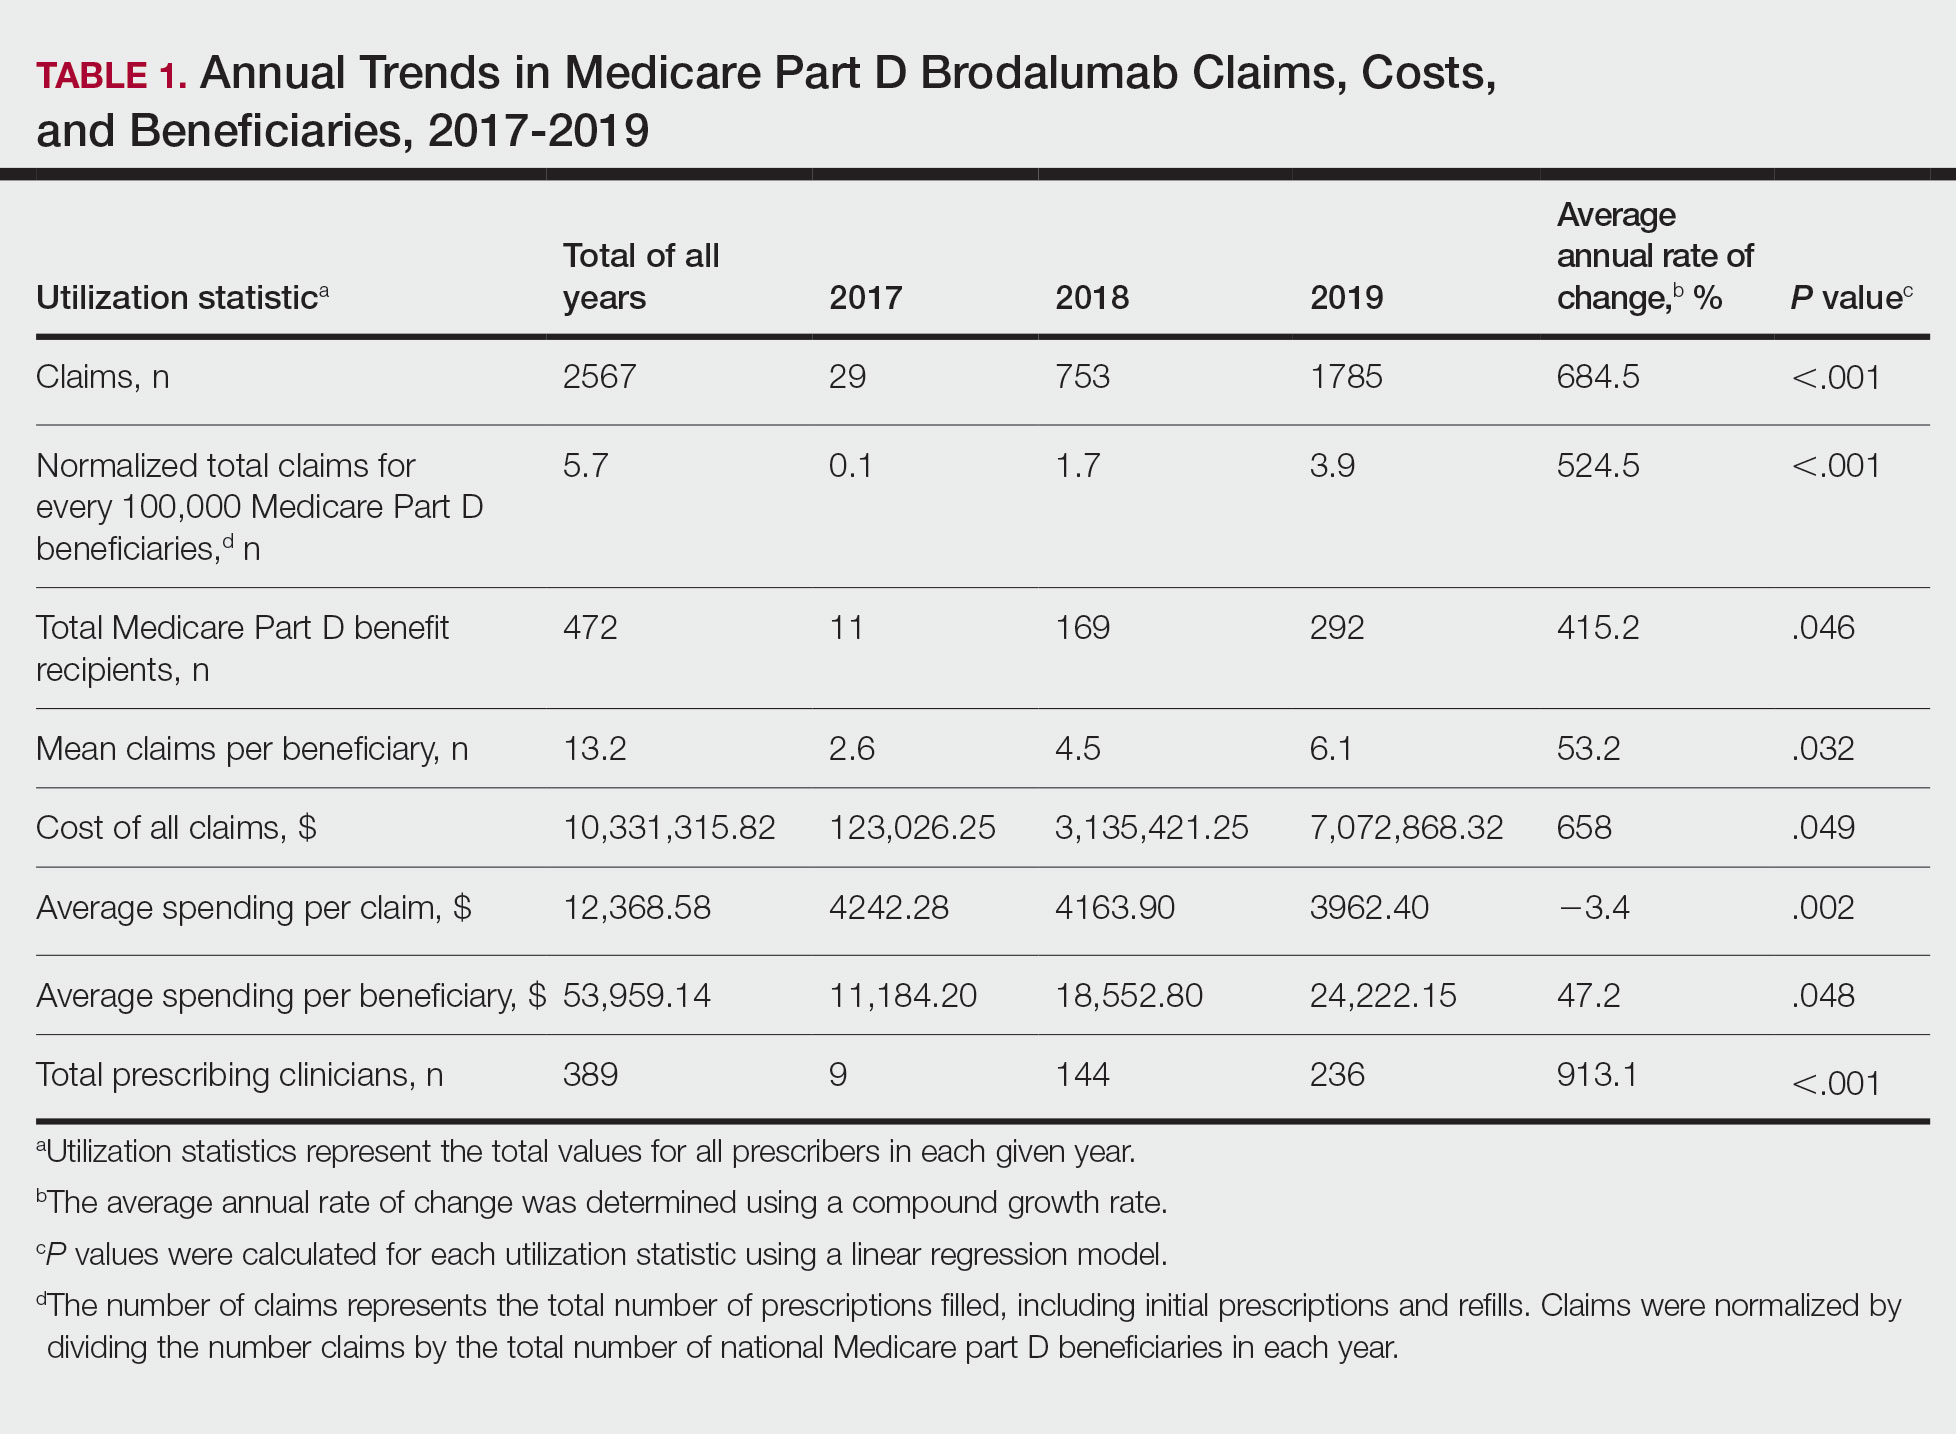 Annual Trends in Medicare Part D Brodalumab Claims, Costs, and Beneficiaries, 2017-2019